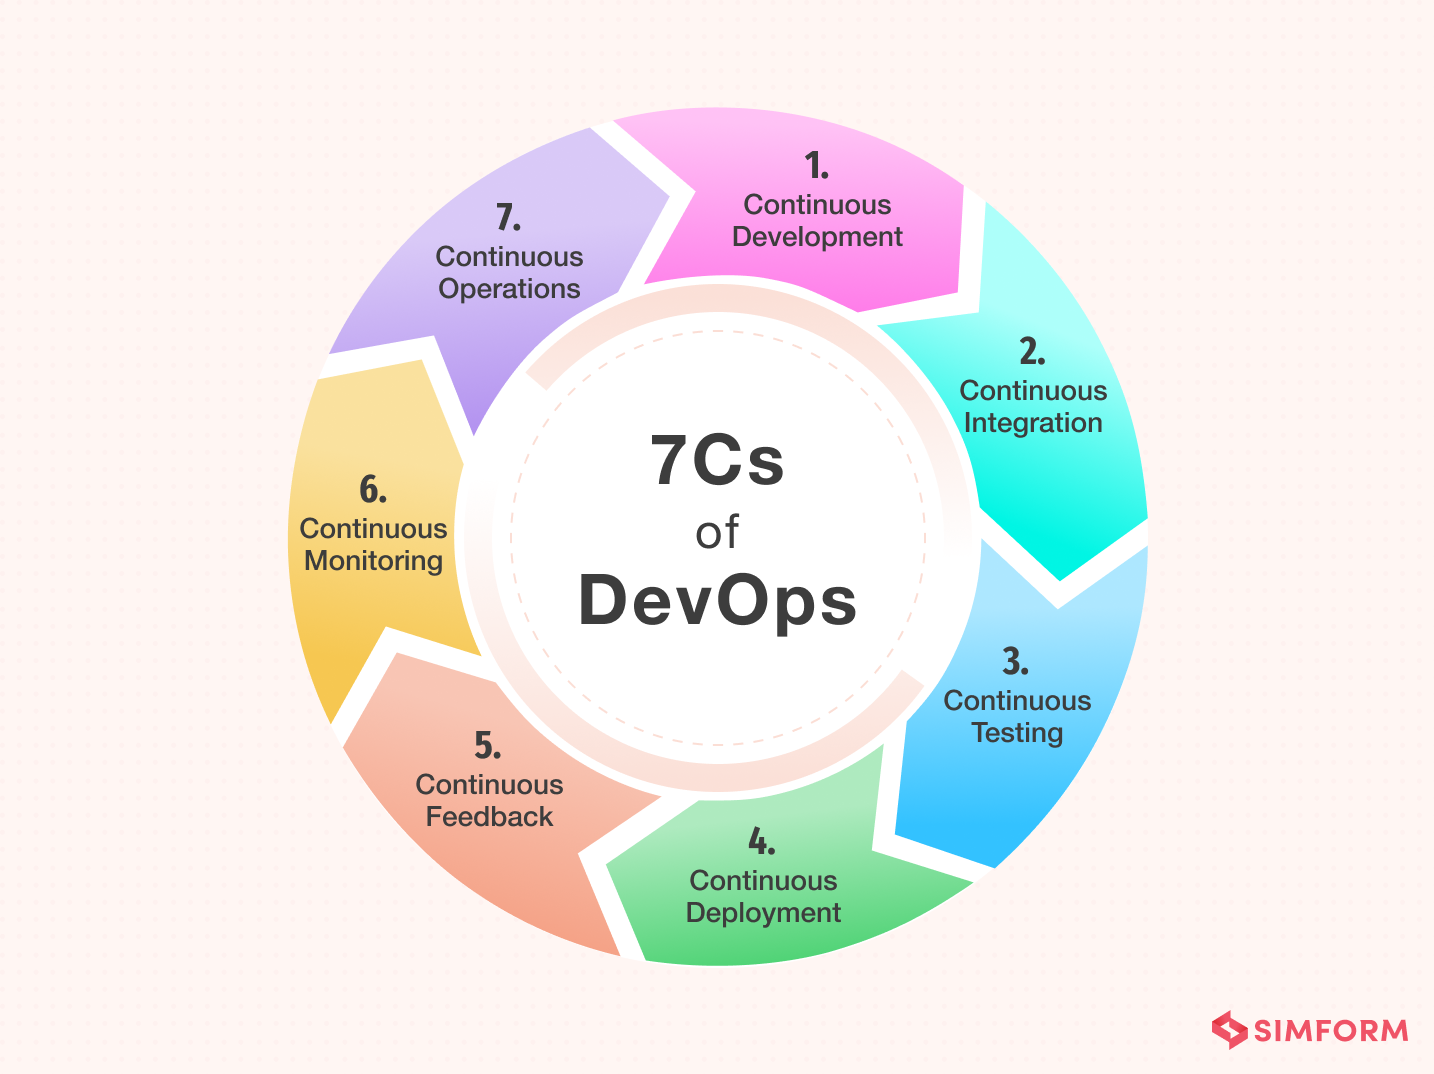 DevOps Lifecycle 7 Phases Explained in Detail with Examples (2022)